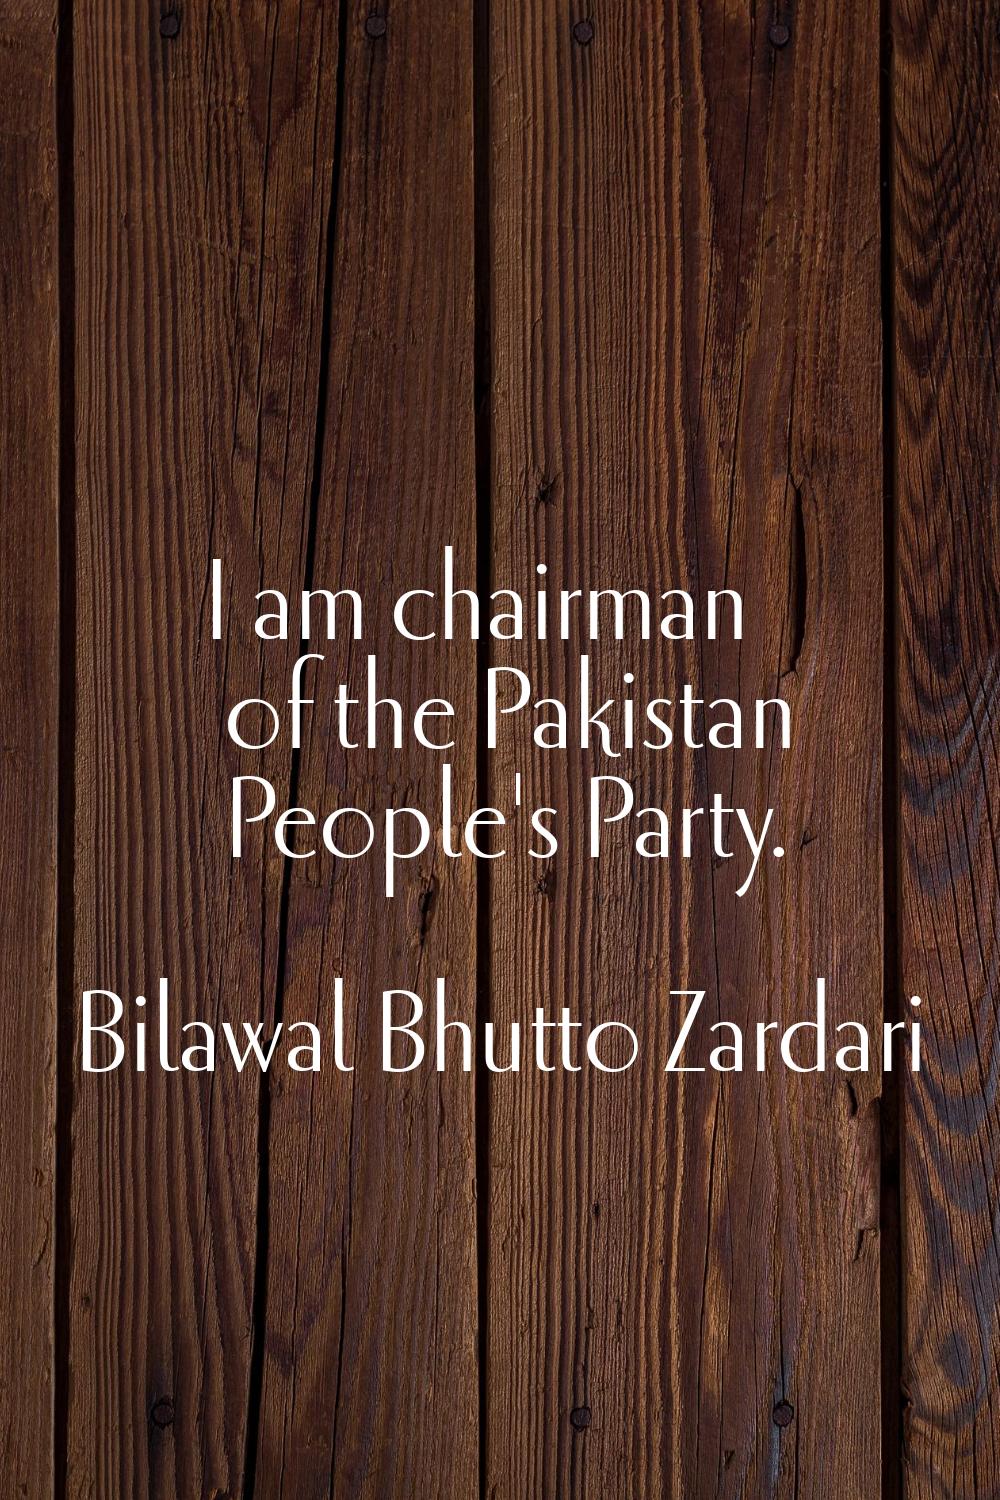 I am chairman of the Pakistan People's Party.